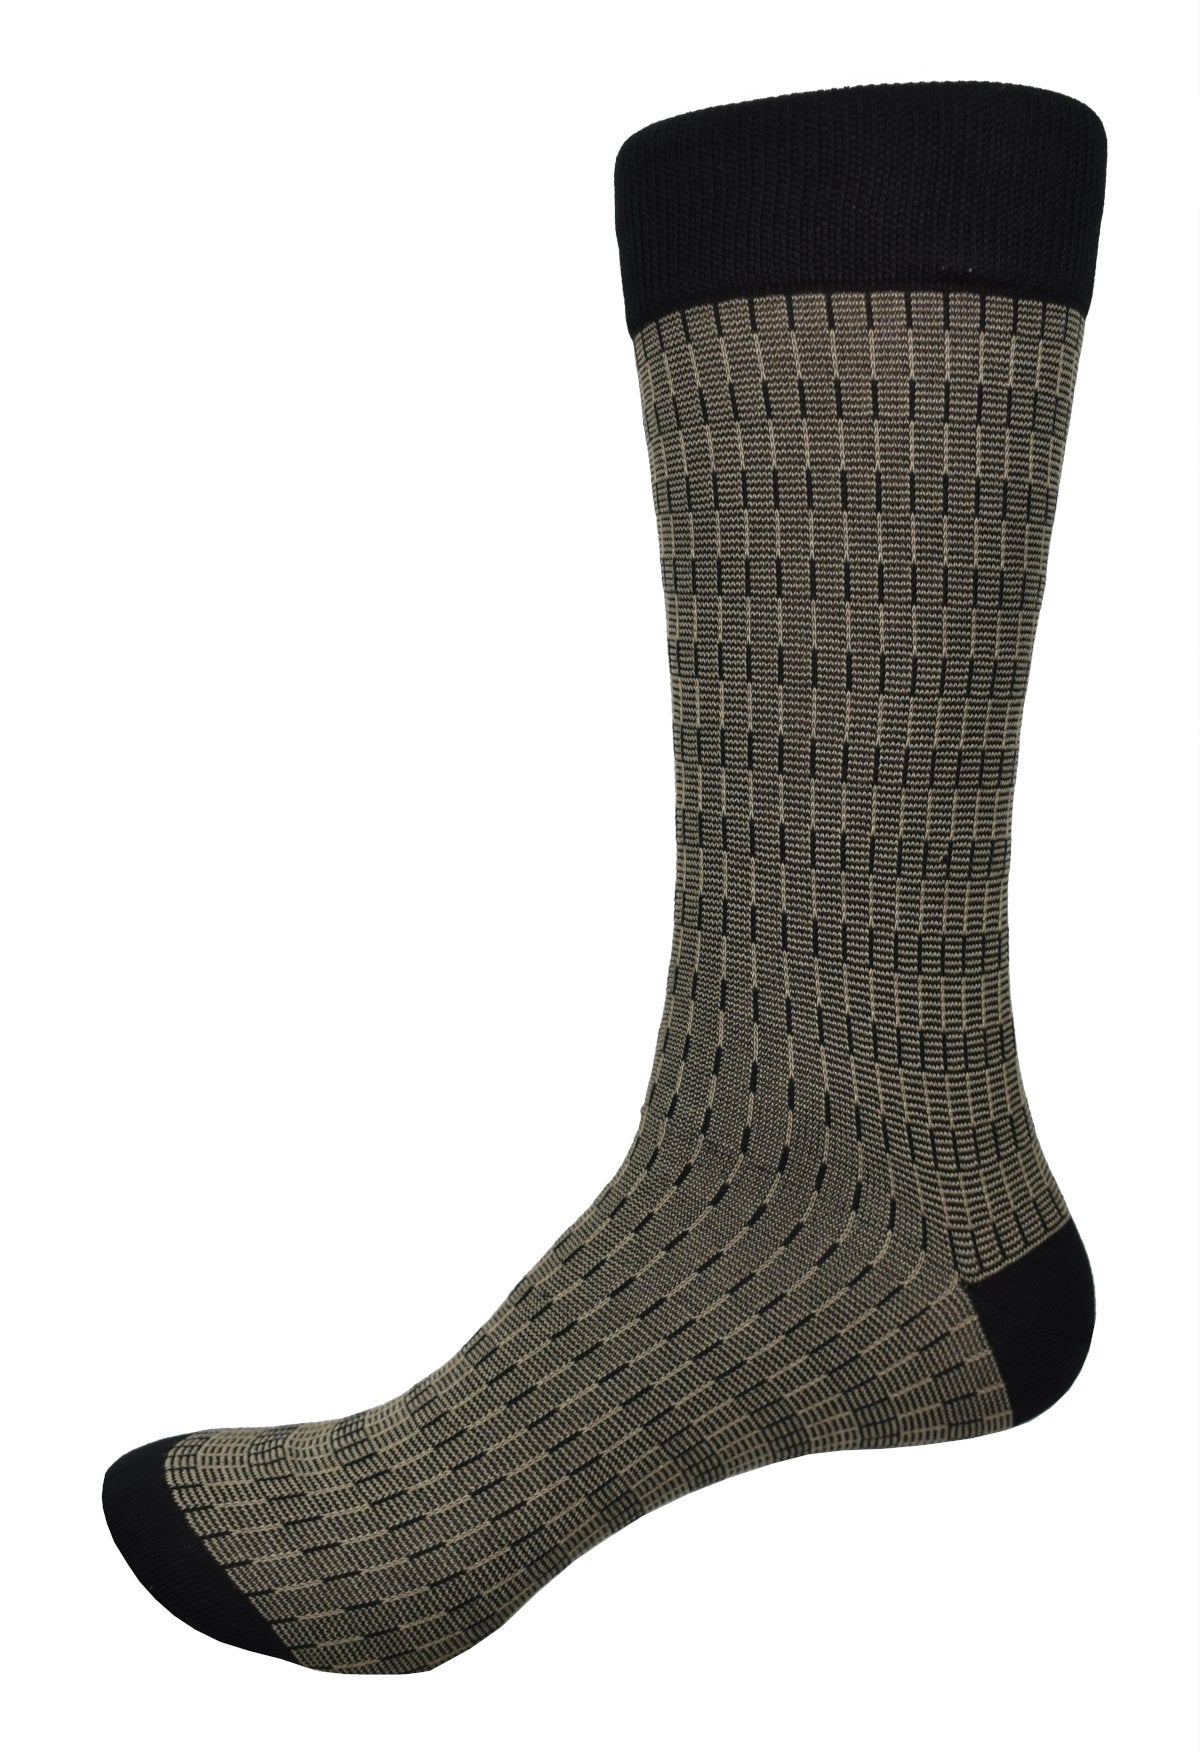 Introducing ZV1561 Black Tonal Stripes, the perfect blend of comfort and style. Made with soft mercerized cotton in rich black and gold tones, this sock features a fine pattern for a traditional yet elegant look. Available in sizes 9-11, step into style with these luxurious socks.